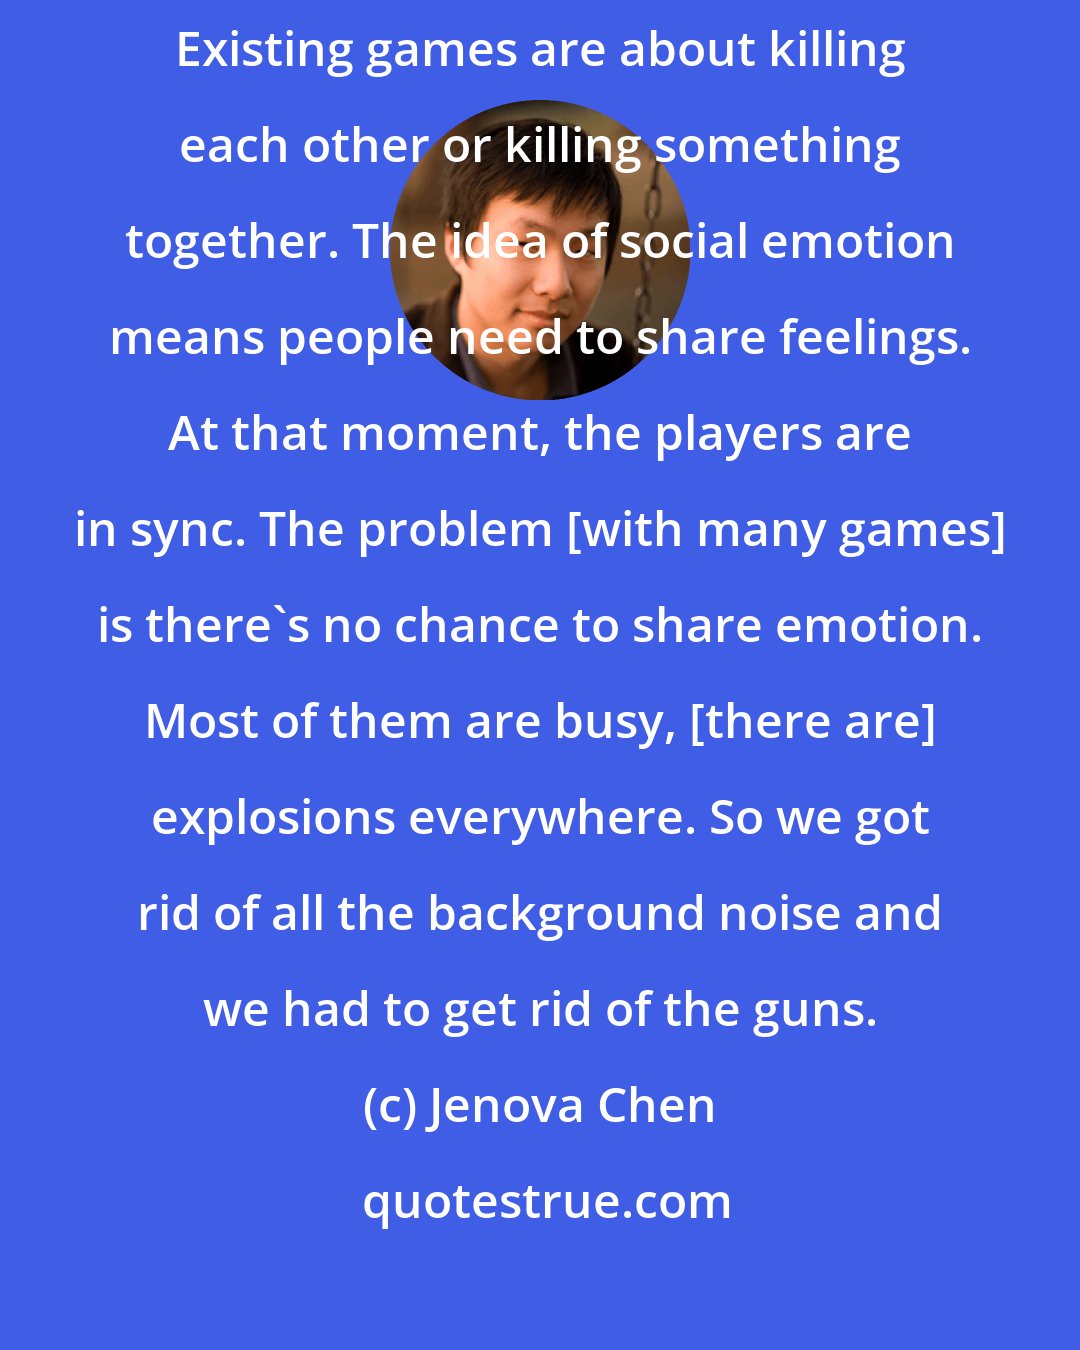 Jenova Chen: I wanted to see if I could create something that is emotional between people. Existing games are about killing each other or killing something together. The idea of social emotion means people need to share feelings. At that moment, the players are in sync. The problem [with many games] is there's no chance to share emotion. Most of them are busy, [there are] explosions everywhere. So we got rid of all the background noise and we had to get rid of the guns.